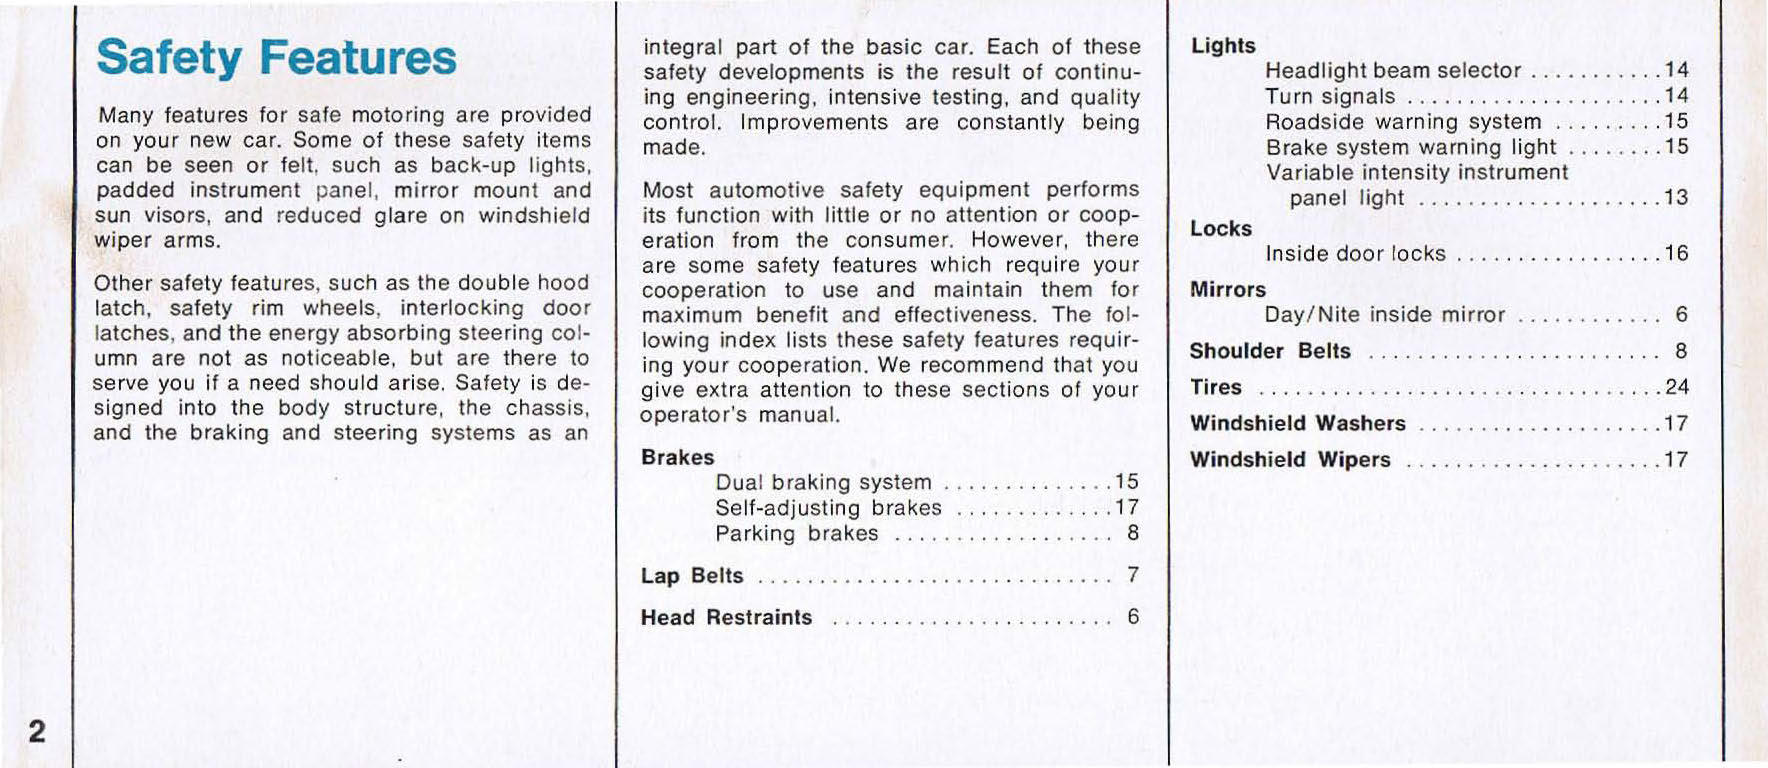 1969_Plymouth_Valiant_Owners_Manual-02